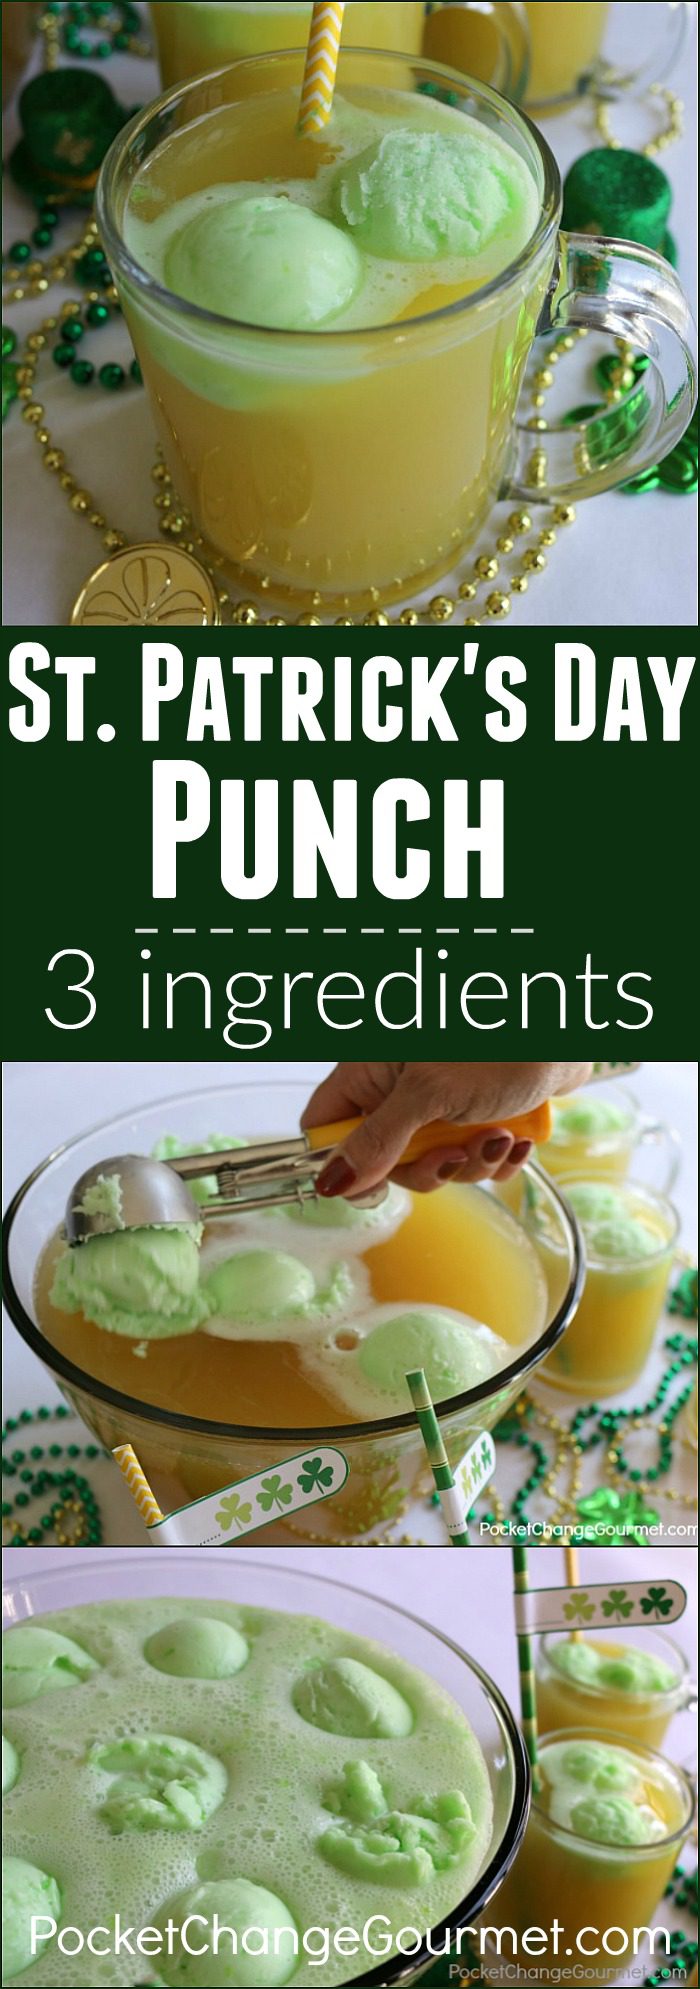 Only 3 ingredients to make this delicious St. Patrick's Day Punch! Change the flavors for other special occasions! 